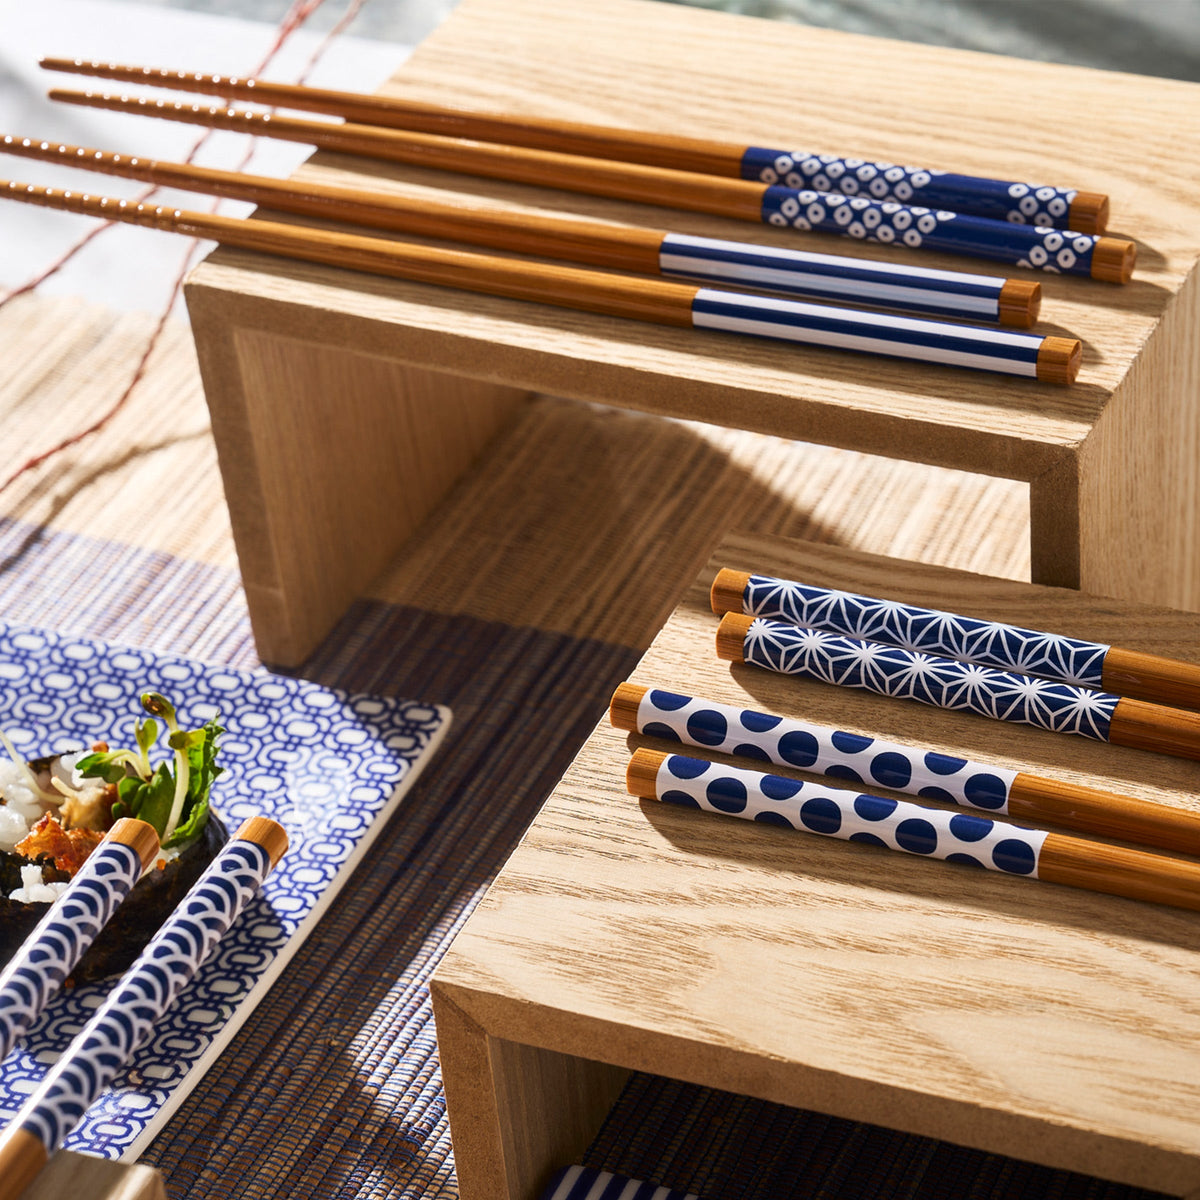 A pair of Kyoto Chopsticks resting on a rustic wooden table by Miya, Inc.